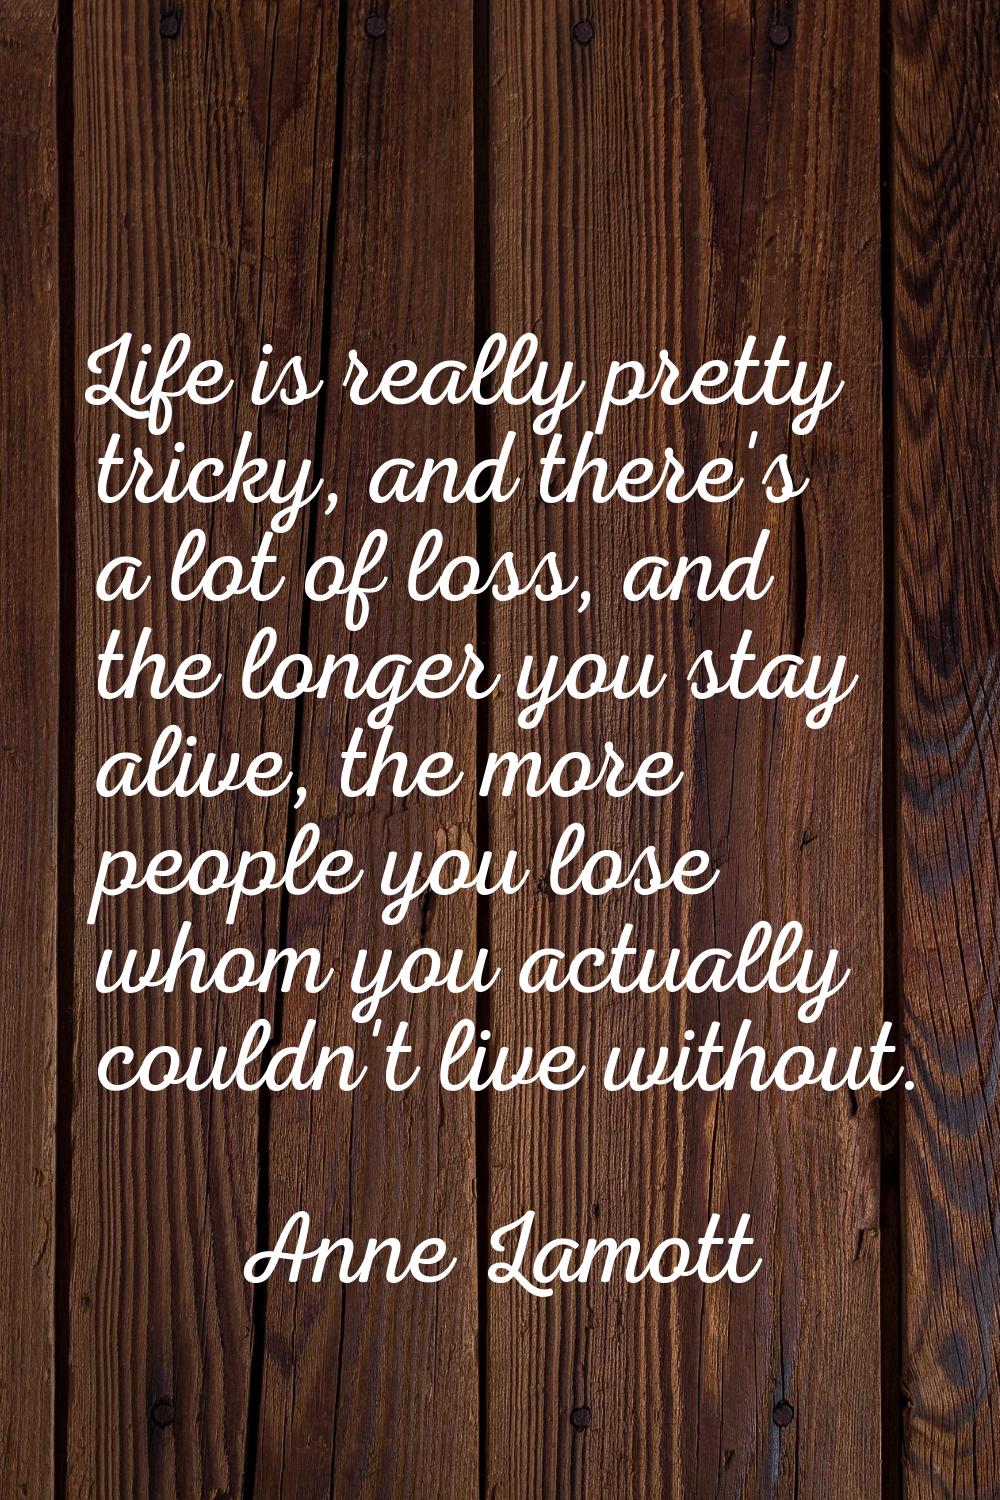 Life is really pretty tricky, and there's a lot of loss, and the longer you stay alive, the more pe